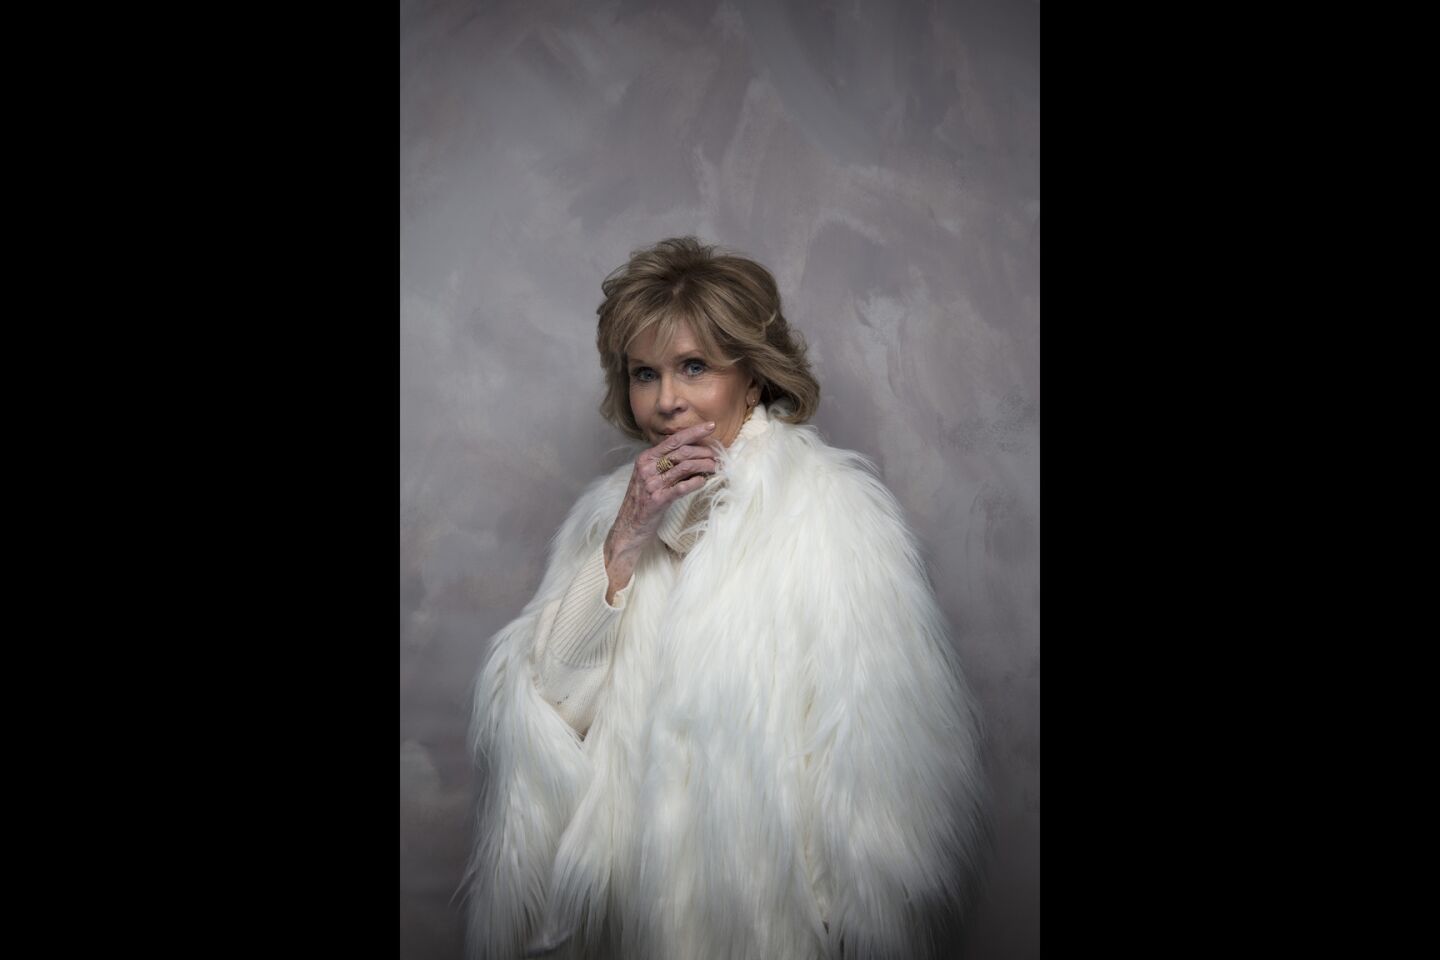 Jane Fonda, from the film "Jane Fonda in Five Acts," photographed in the L.A. Times studio in Park City, Utah, Jan. 19, 2018.